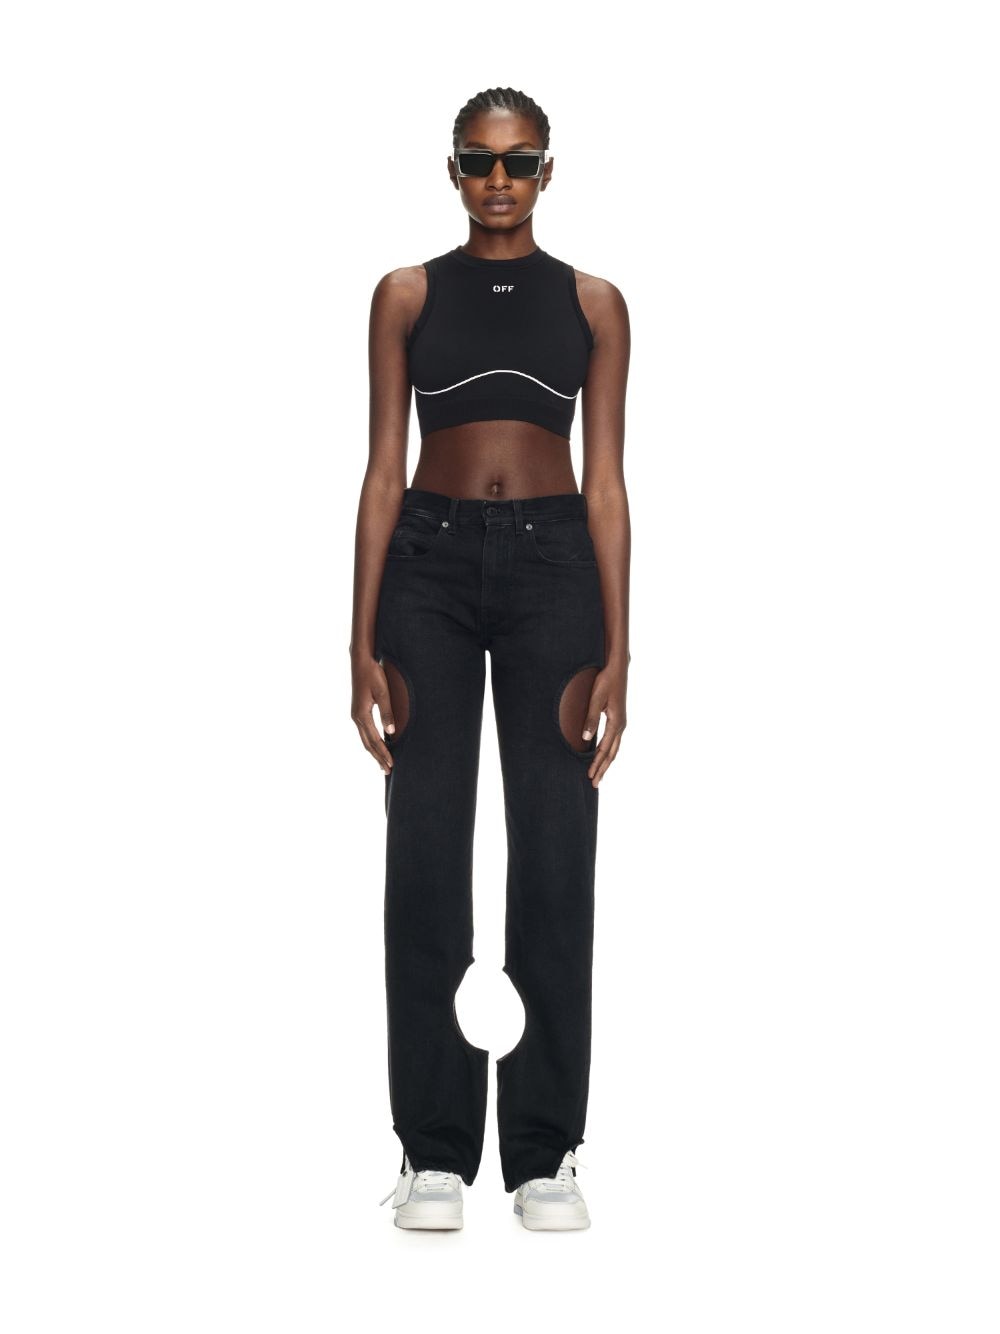 https://cdn-images.farfetch-contents.com/off-white-off-stamp-seamless-bra_21833092_52255465_1000.jpg